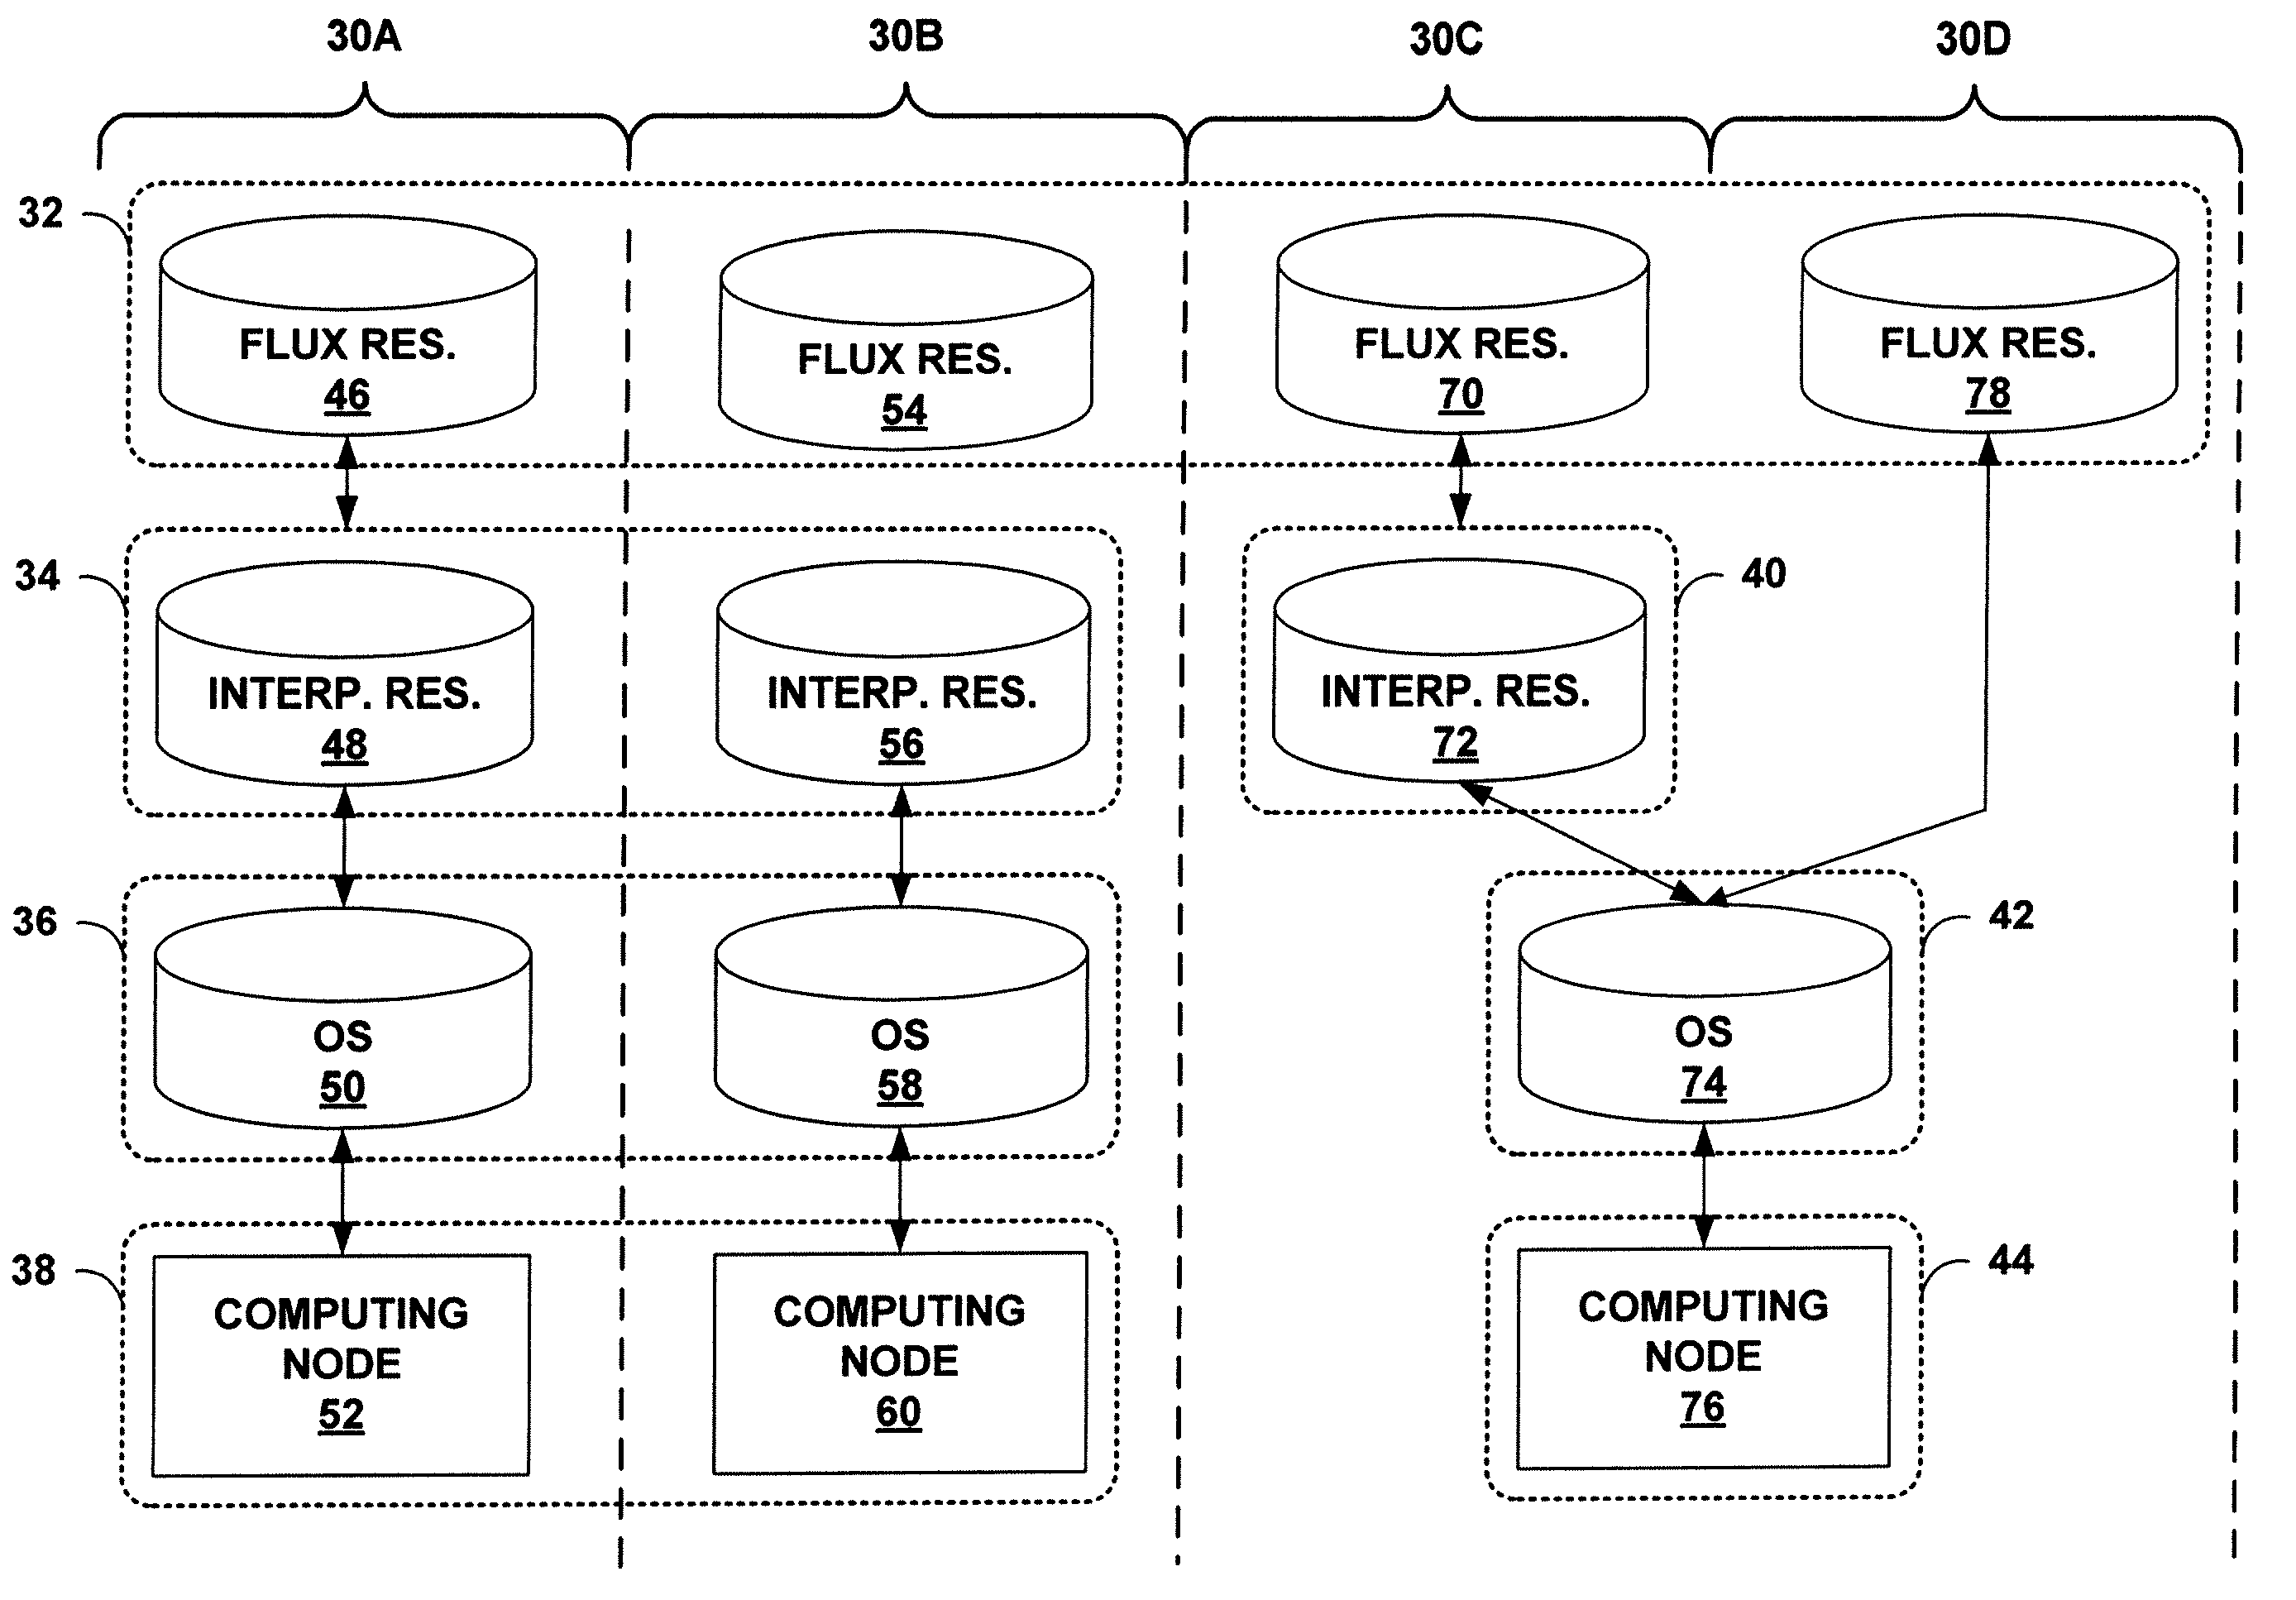 Autonomic control of a distributed computing system using finite state machines